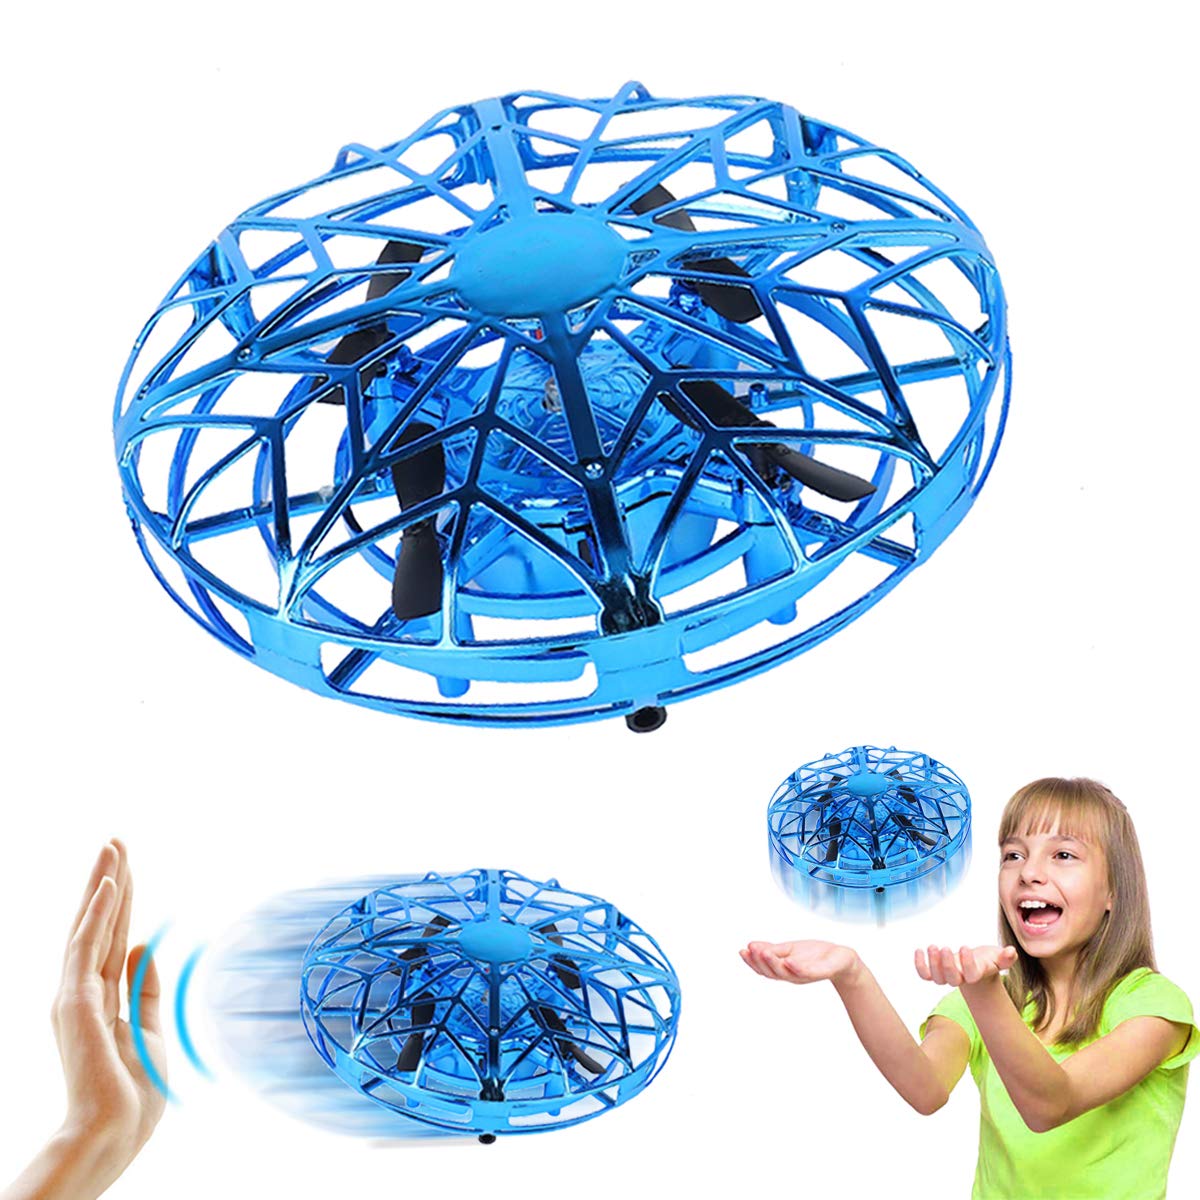 Mini Drone Infrared Induction Flying Toy for Kids Adults,Hand-Controlled Flying Ball,Quadcopter Aircraft 360 degree Rotating